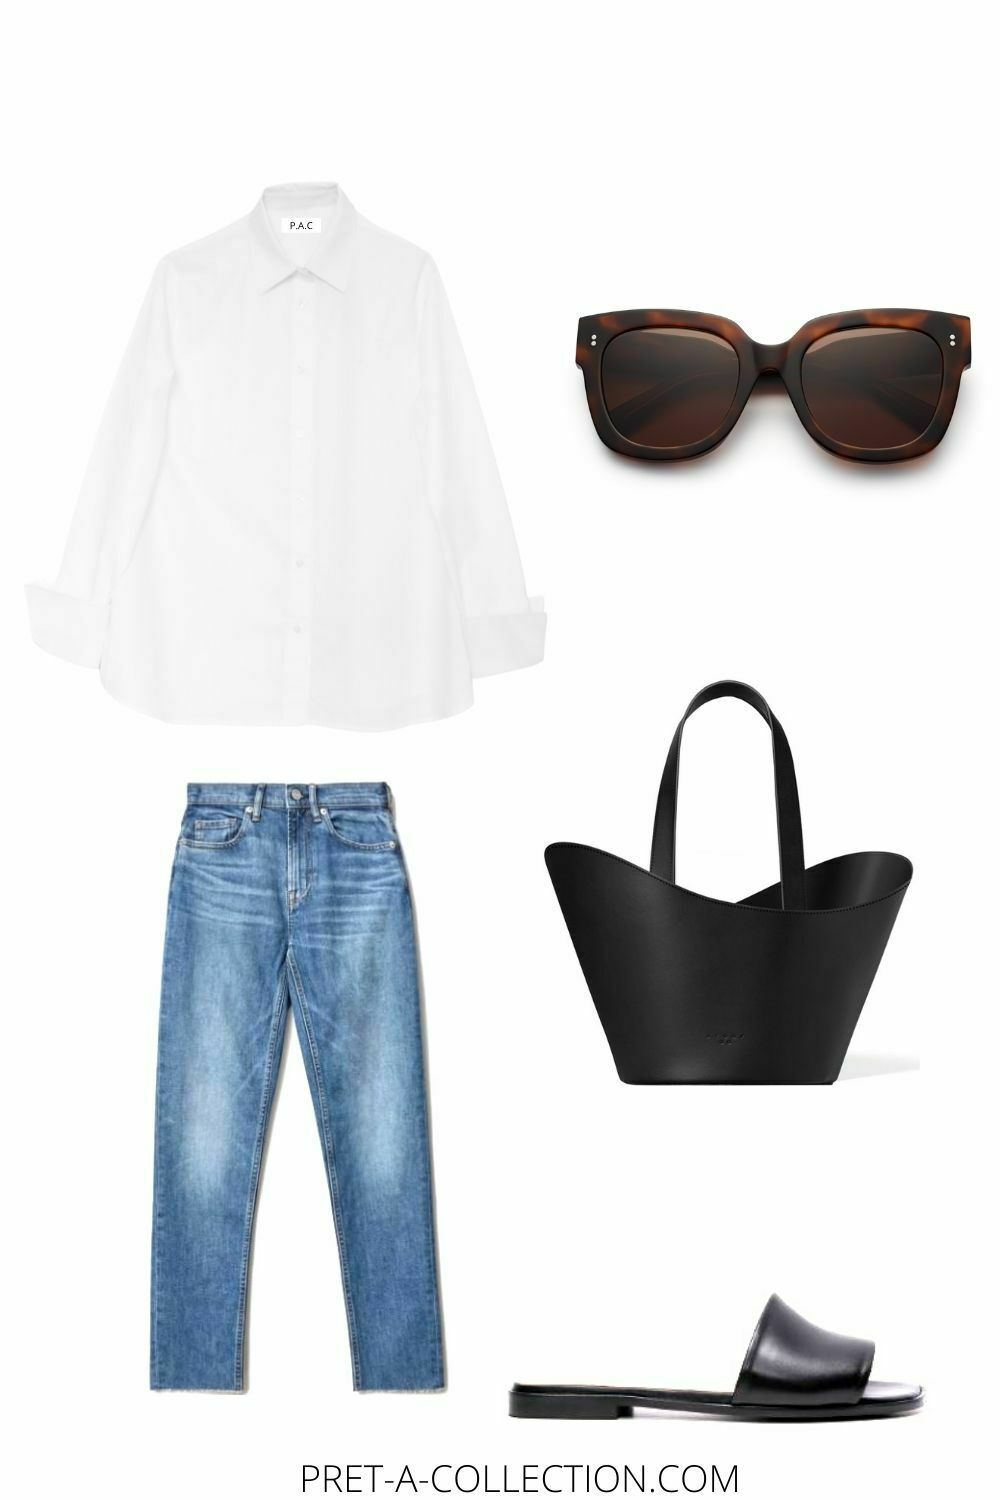 How to wear a white shirt in summer